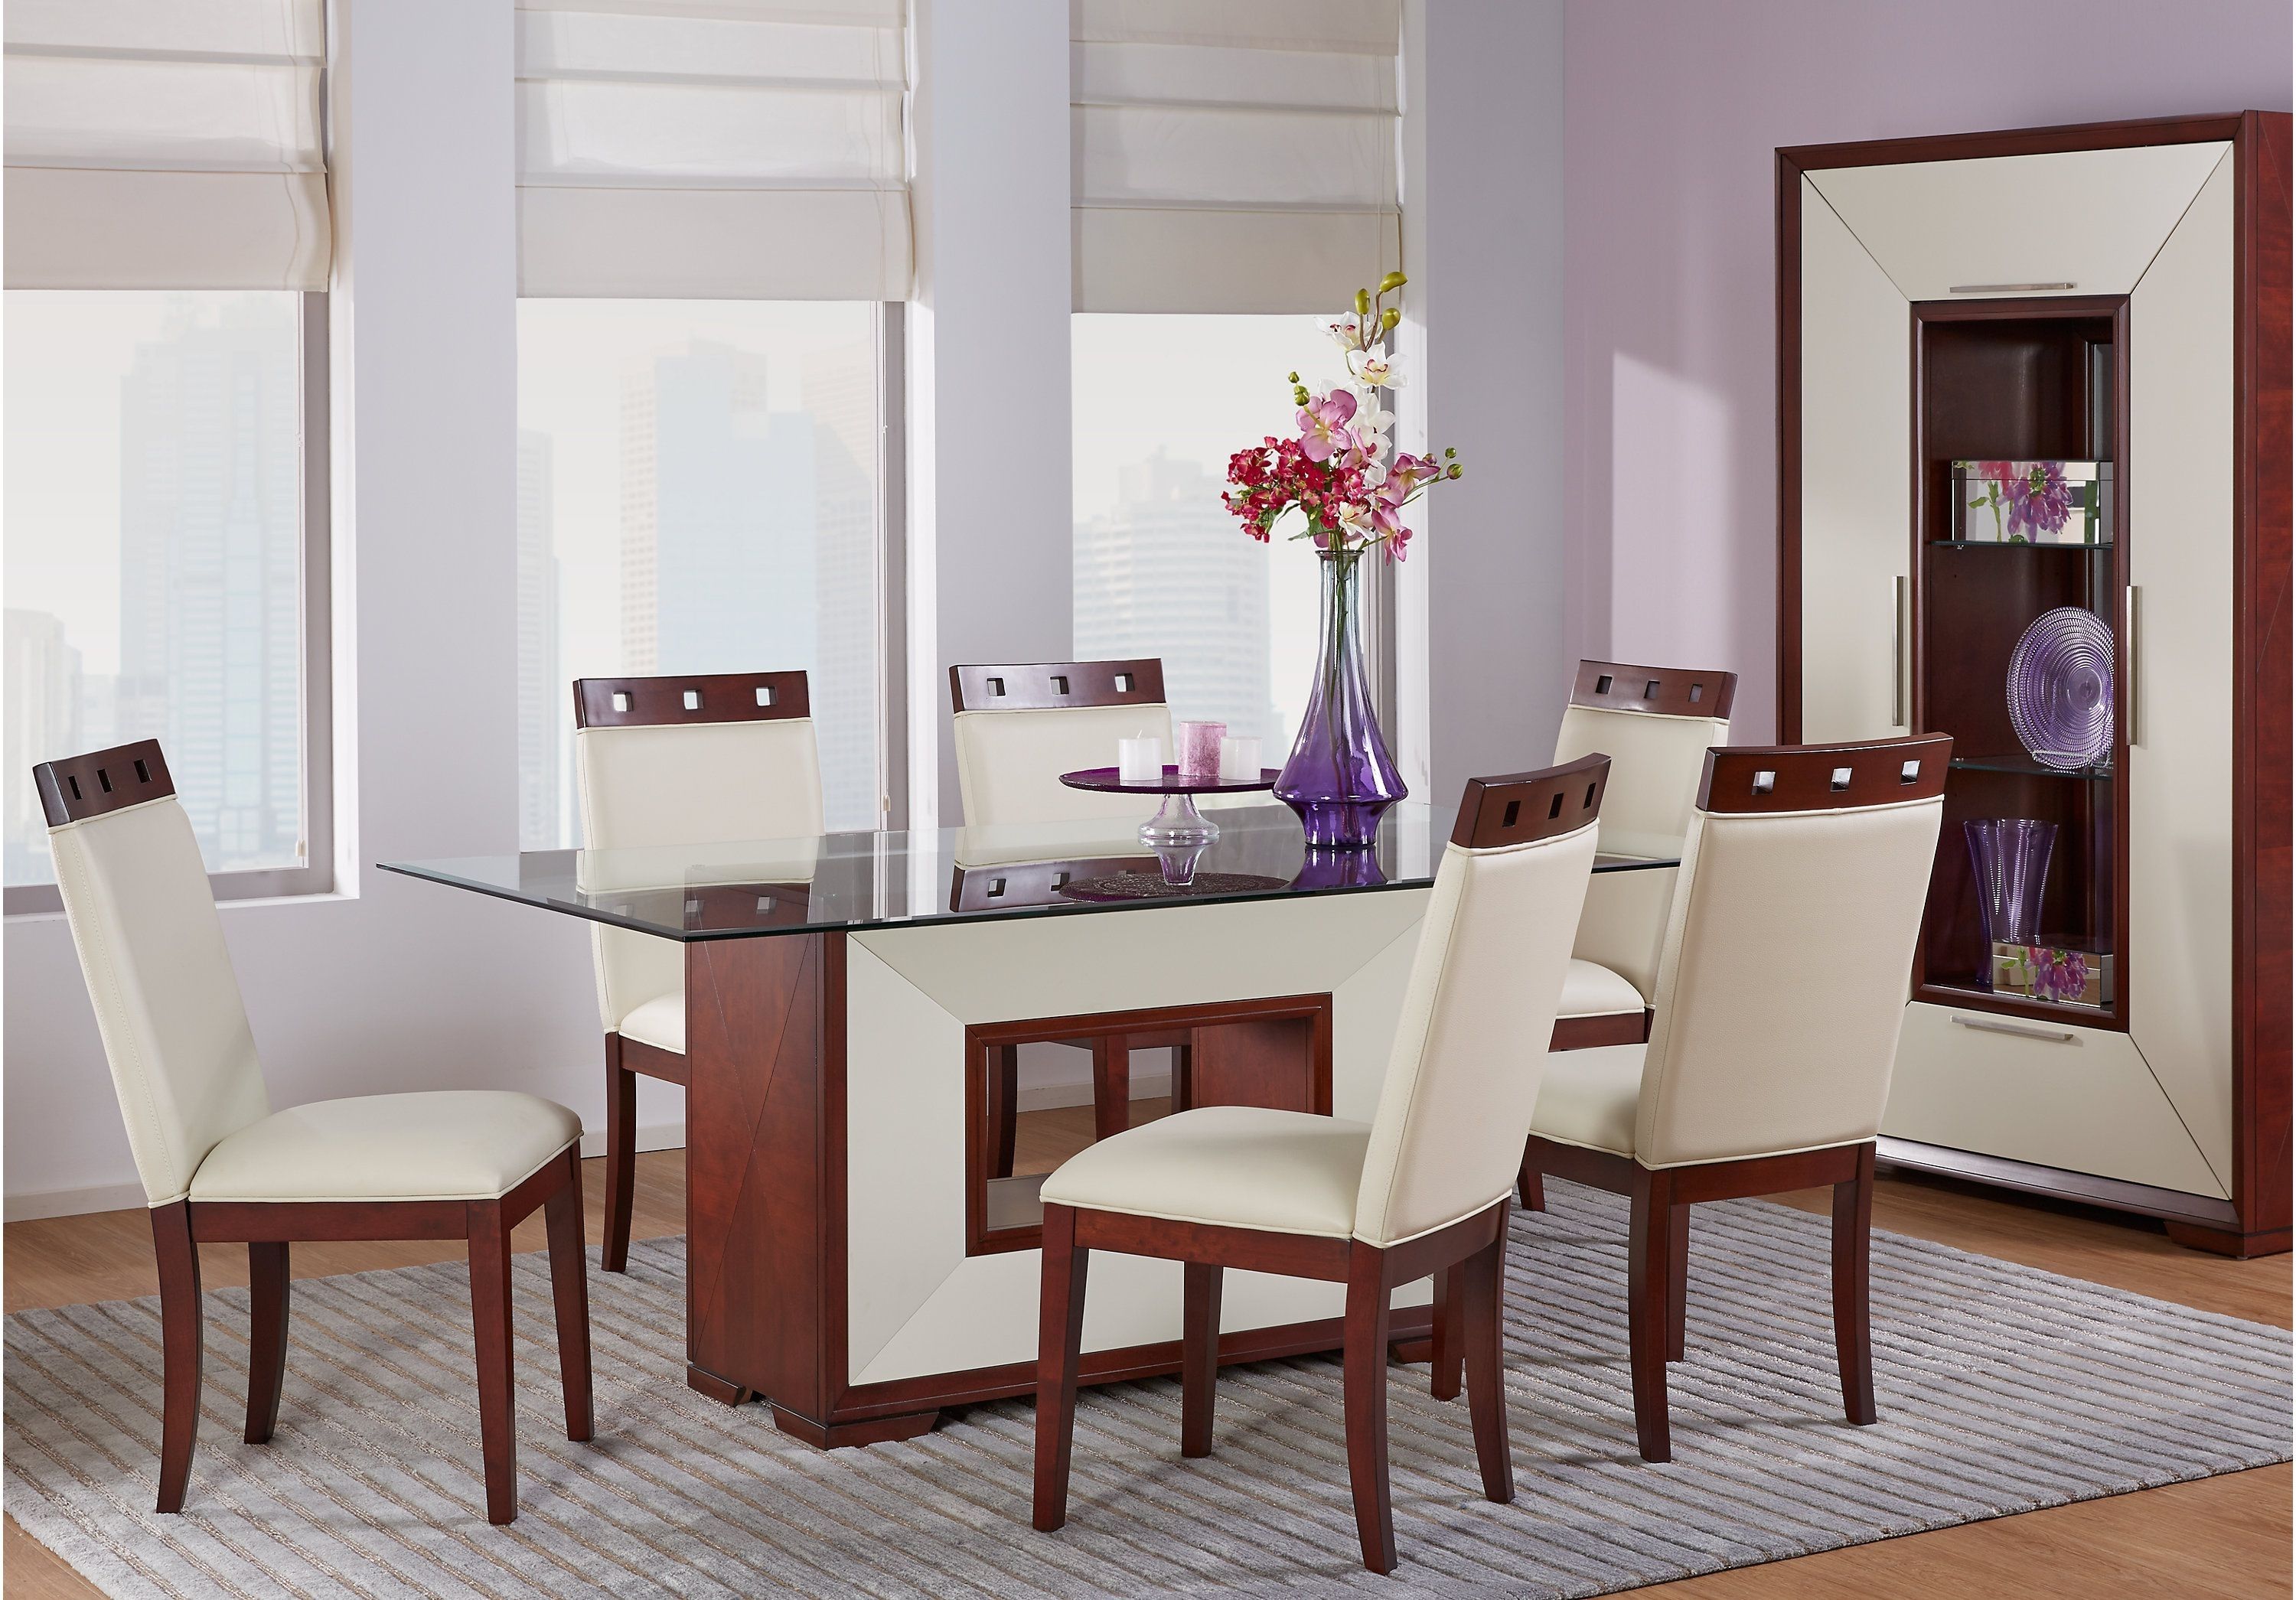 Sofia Vergara Savona Ivory 5 Pc Rectangle Dining Room With Glass Top In Recent Palazzo 6 Piece Dining Sets With Pearson Grey Side Chairs (View 14 of 20)